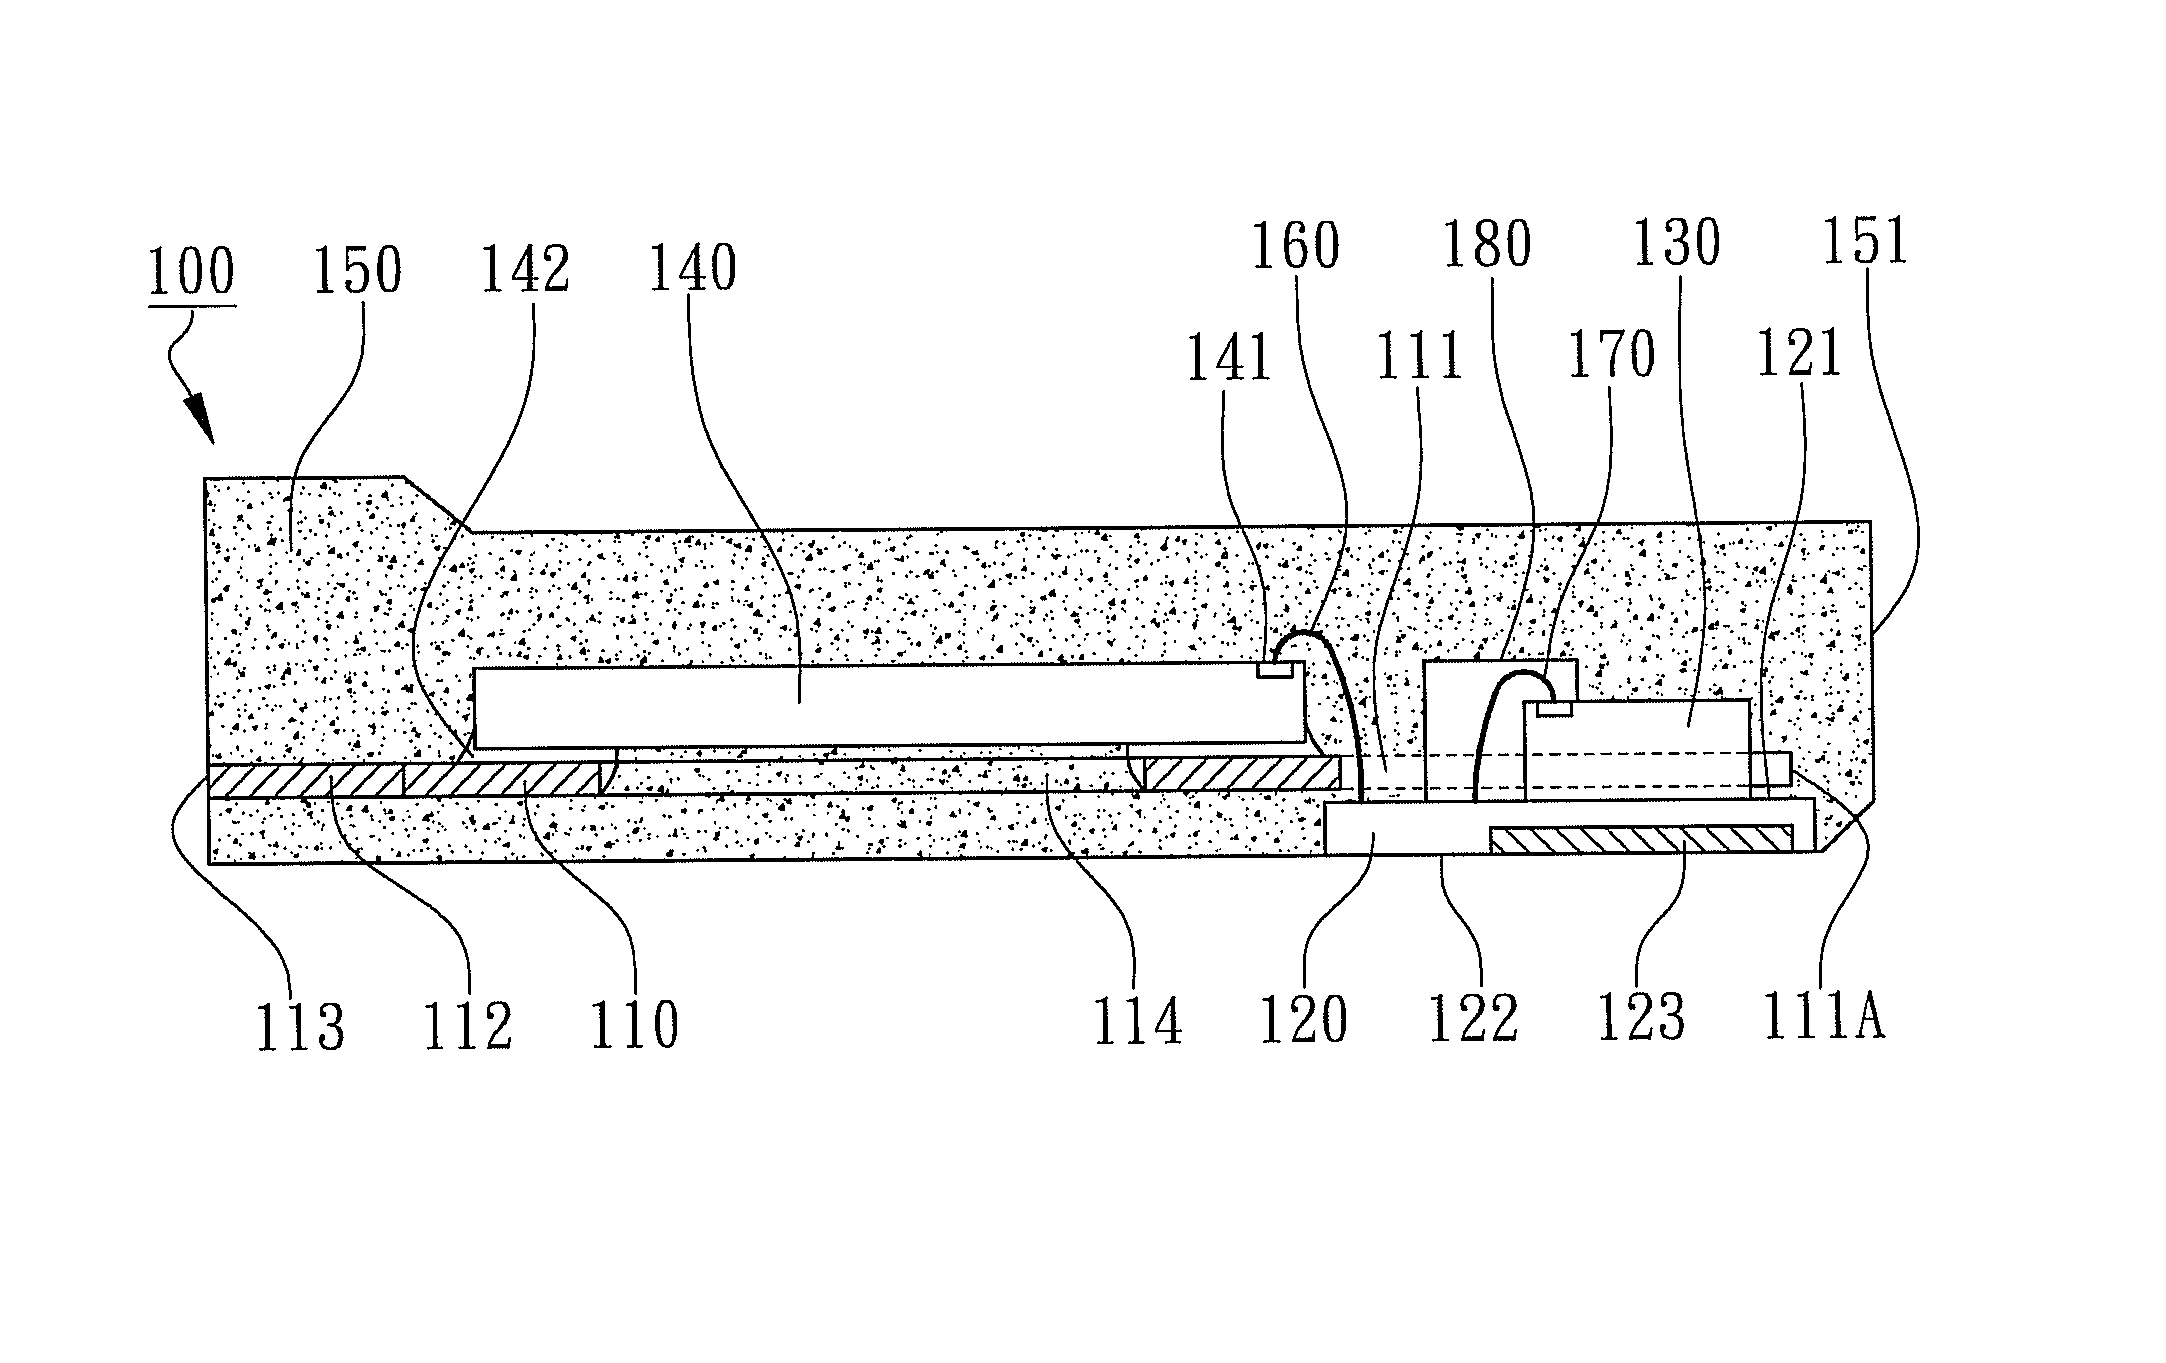 Multi-chip memory package with a small substrate